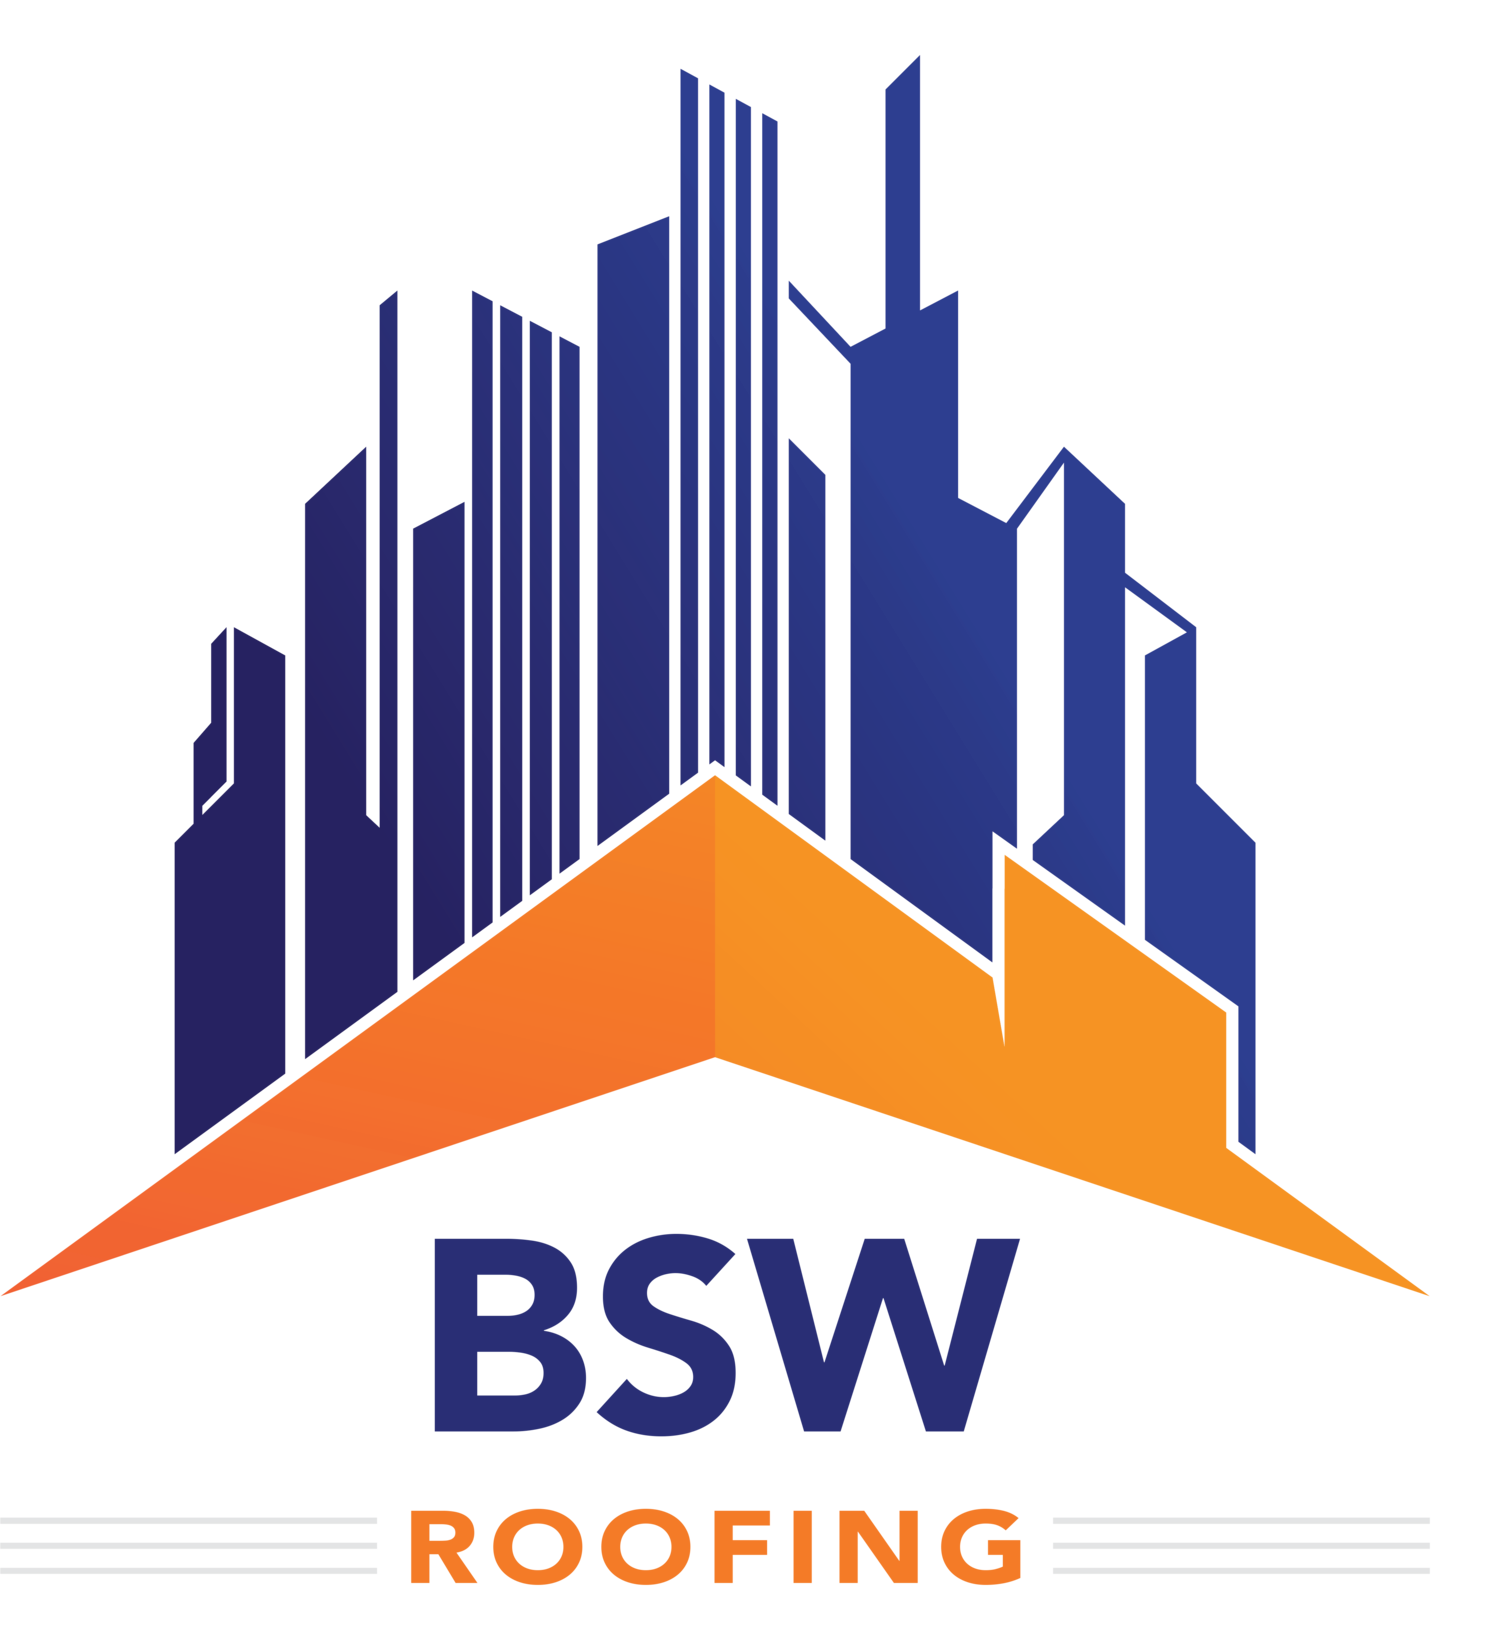 BSW Roofing